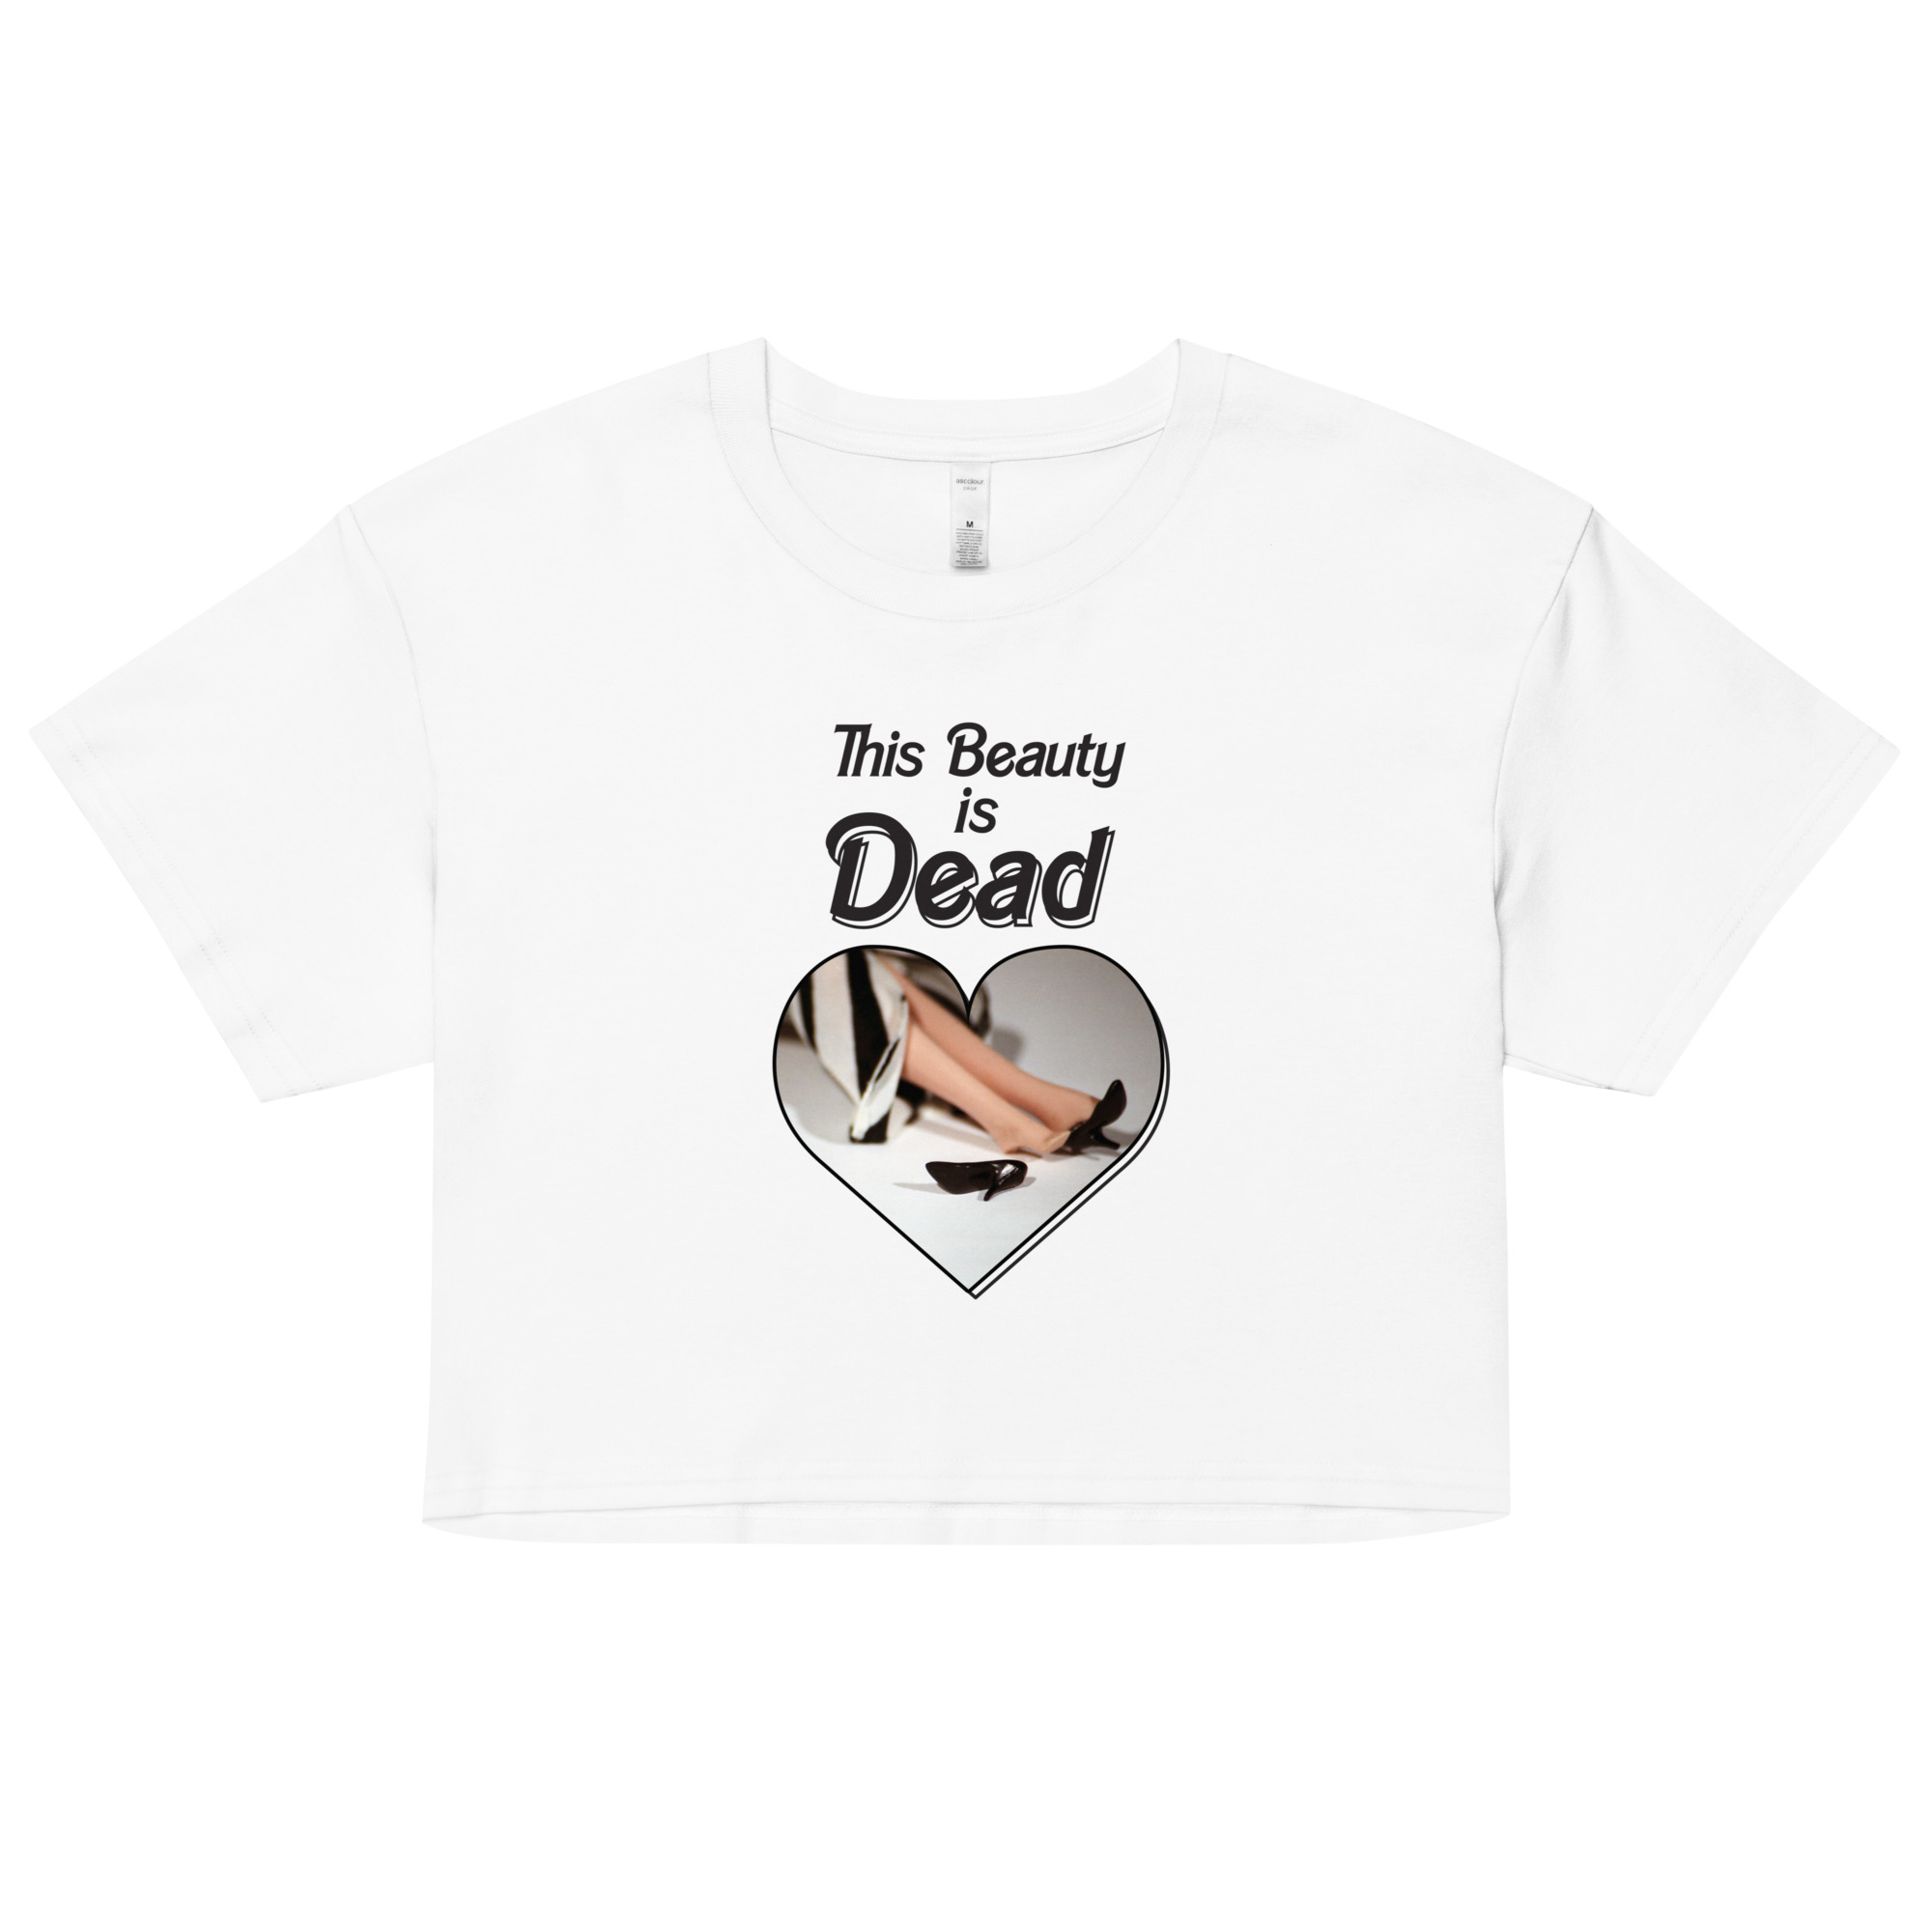 This Beauty is Dead crop top by Wilde Designs